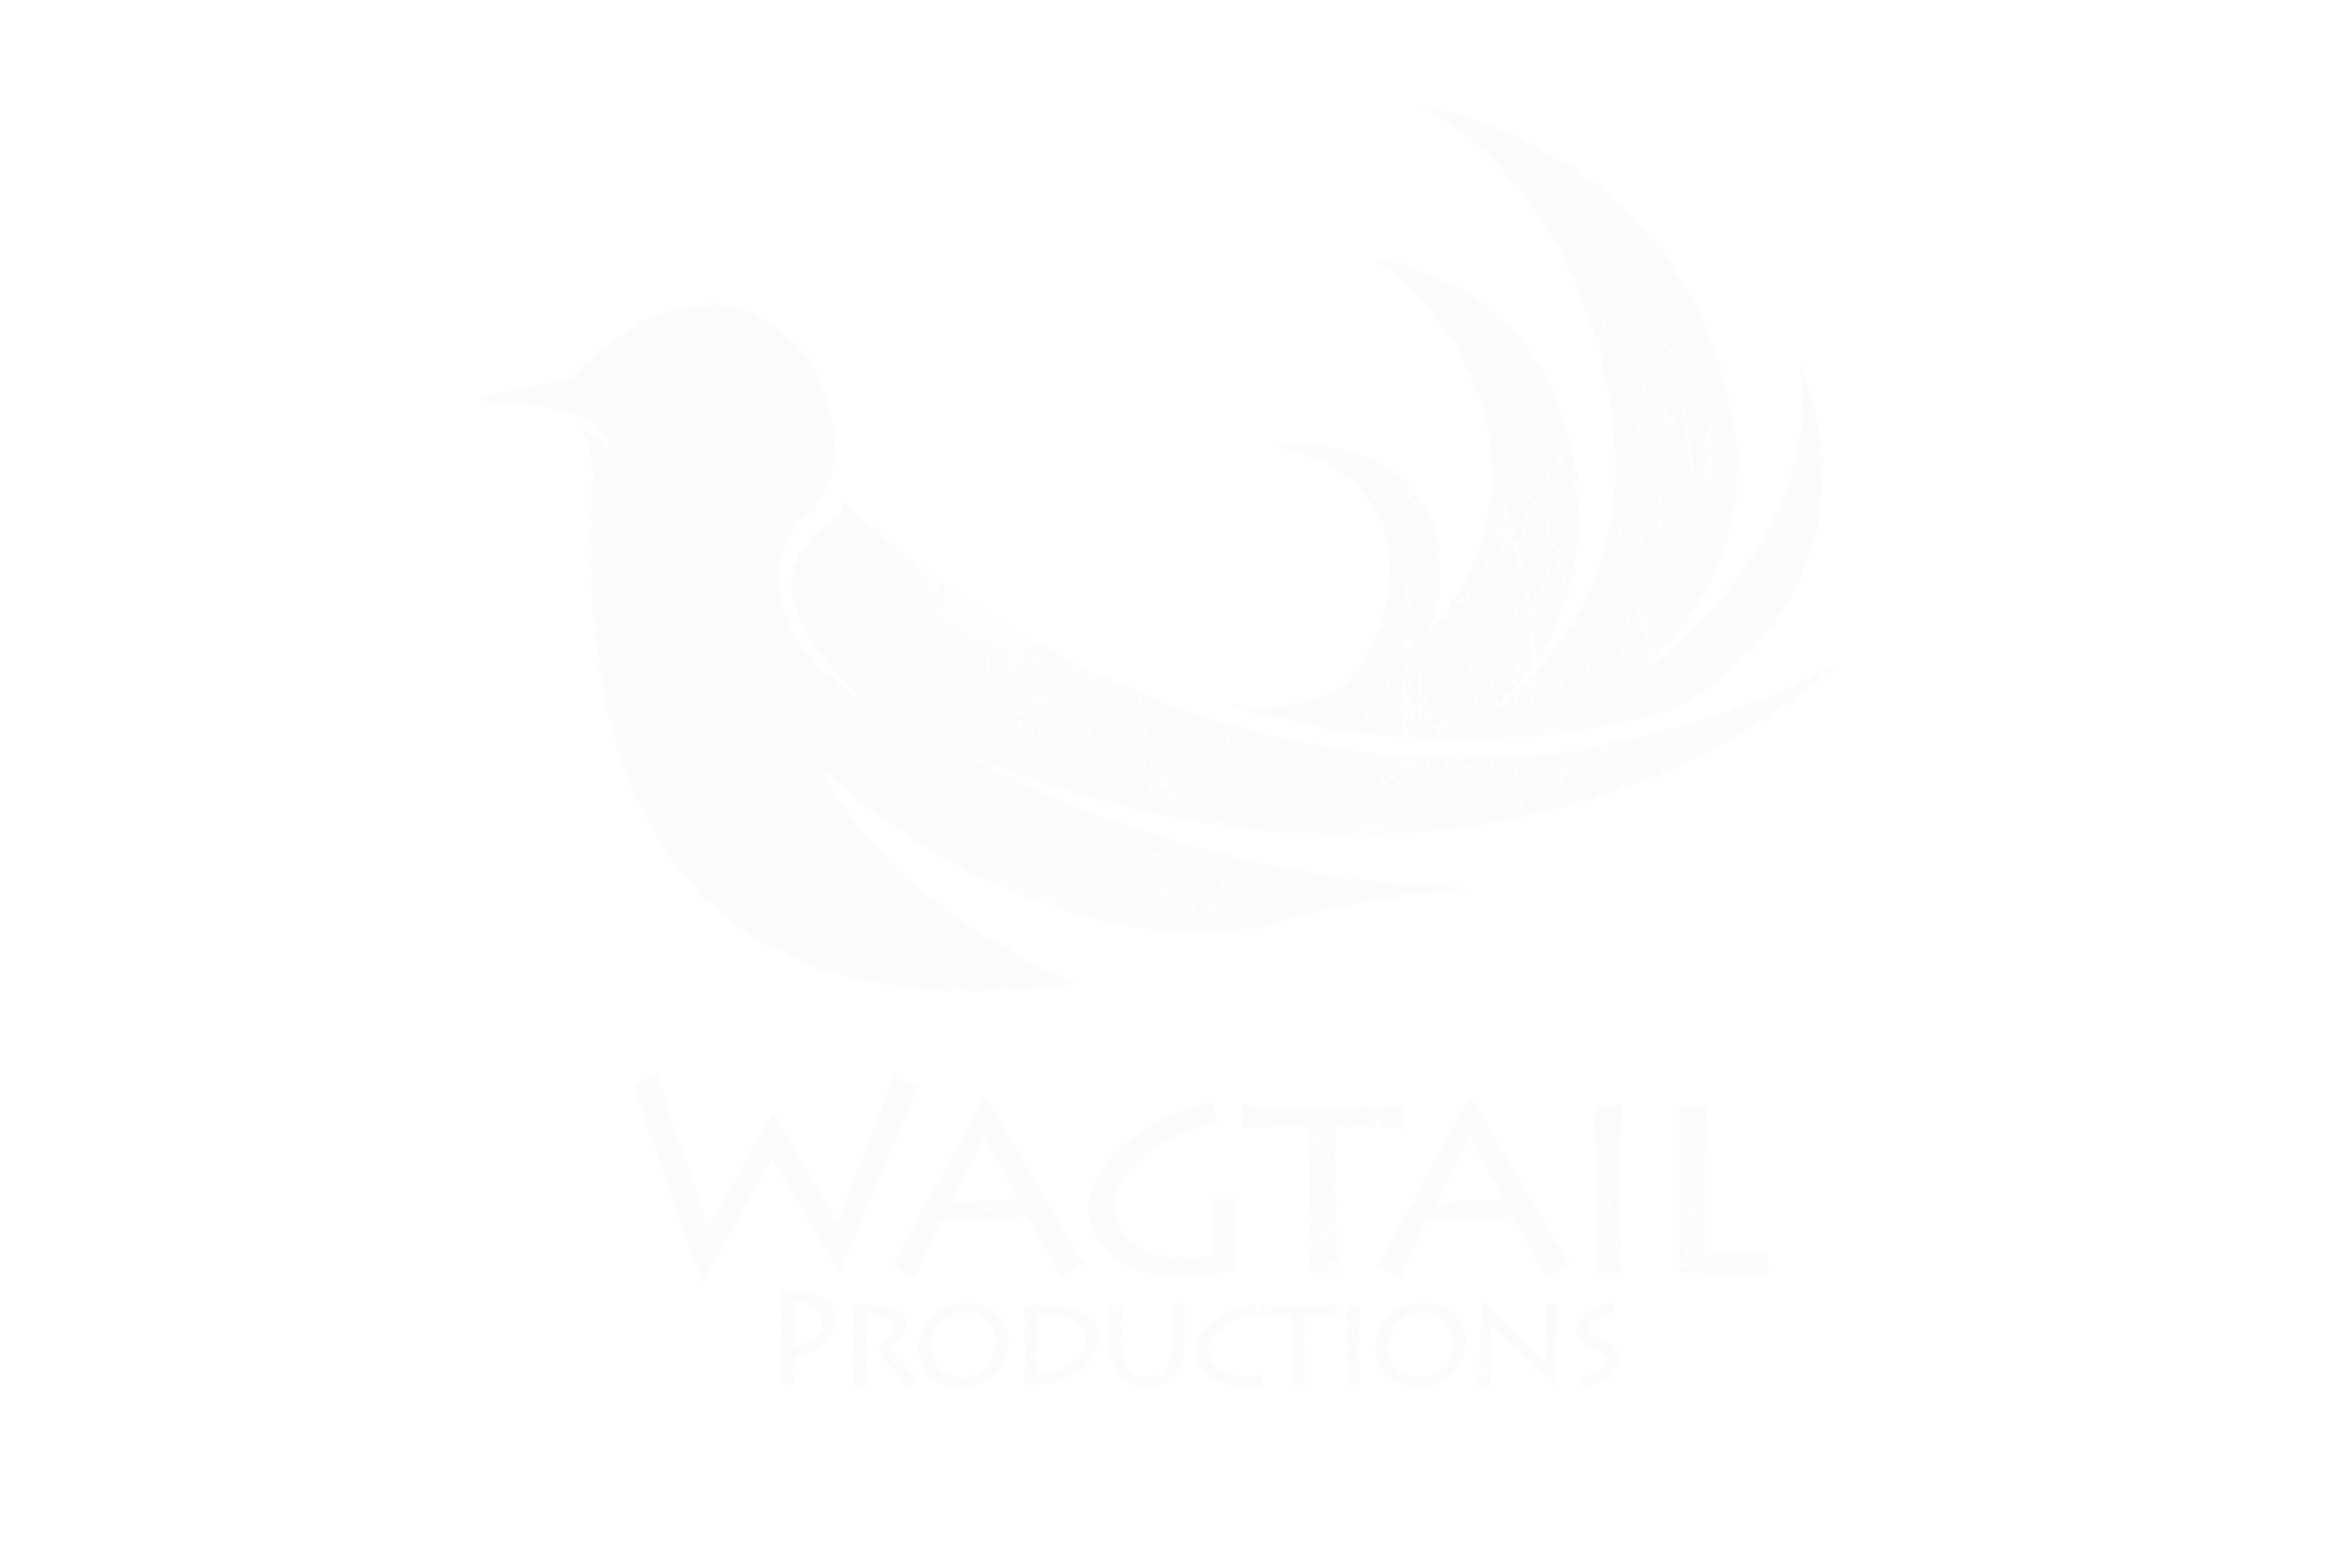 Wagtail Productions